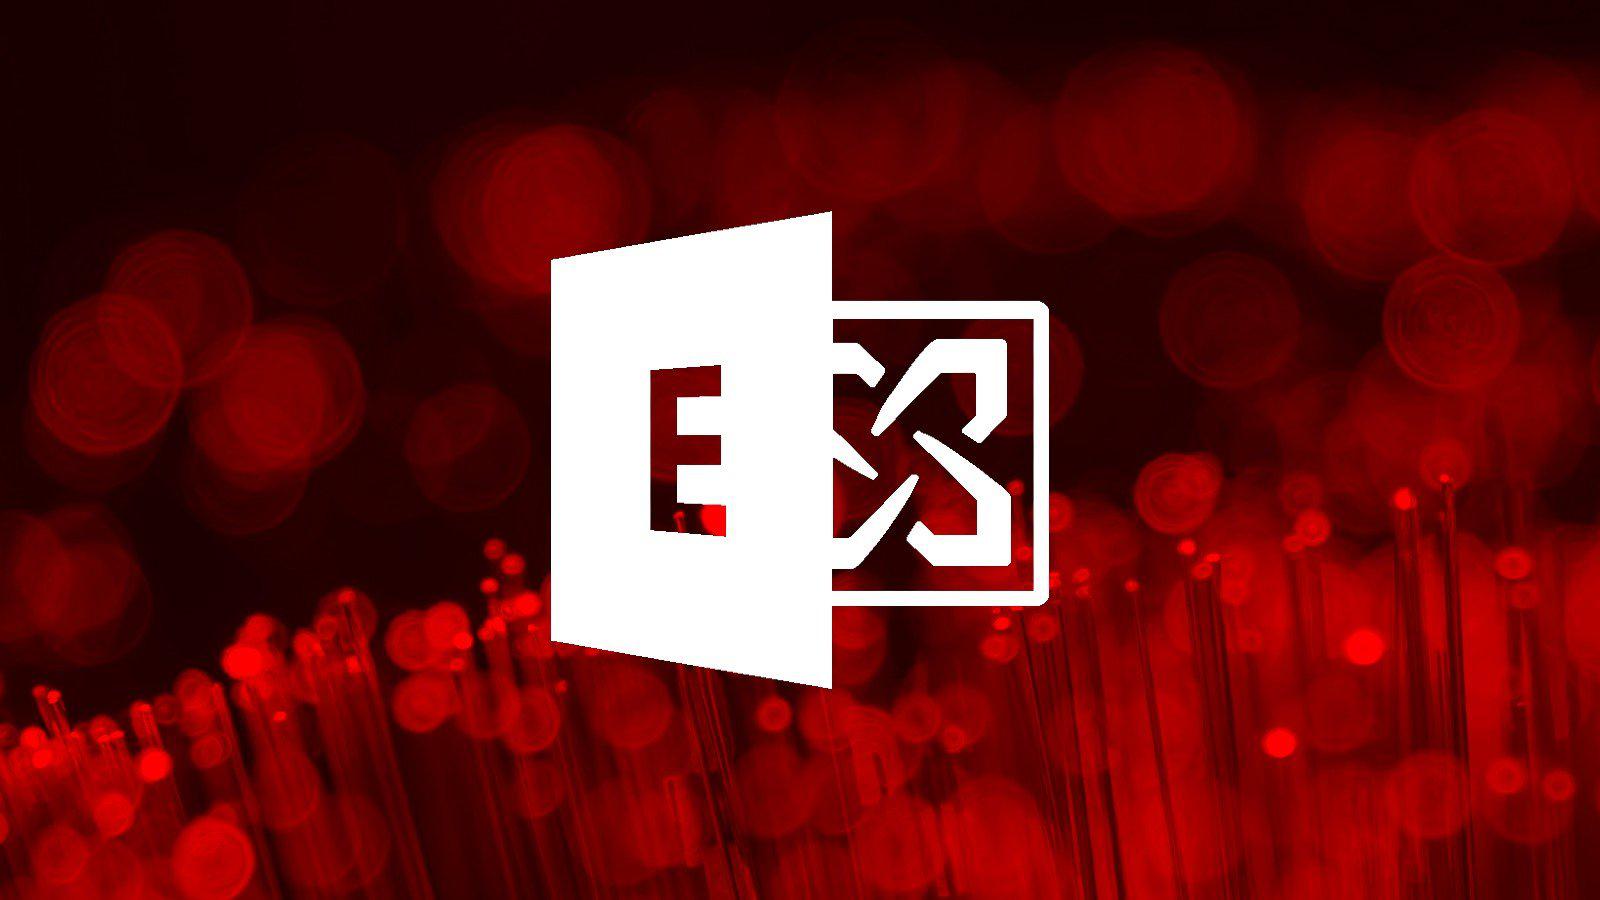 Microsoft releases Exchange hotfixes for security update issues